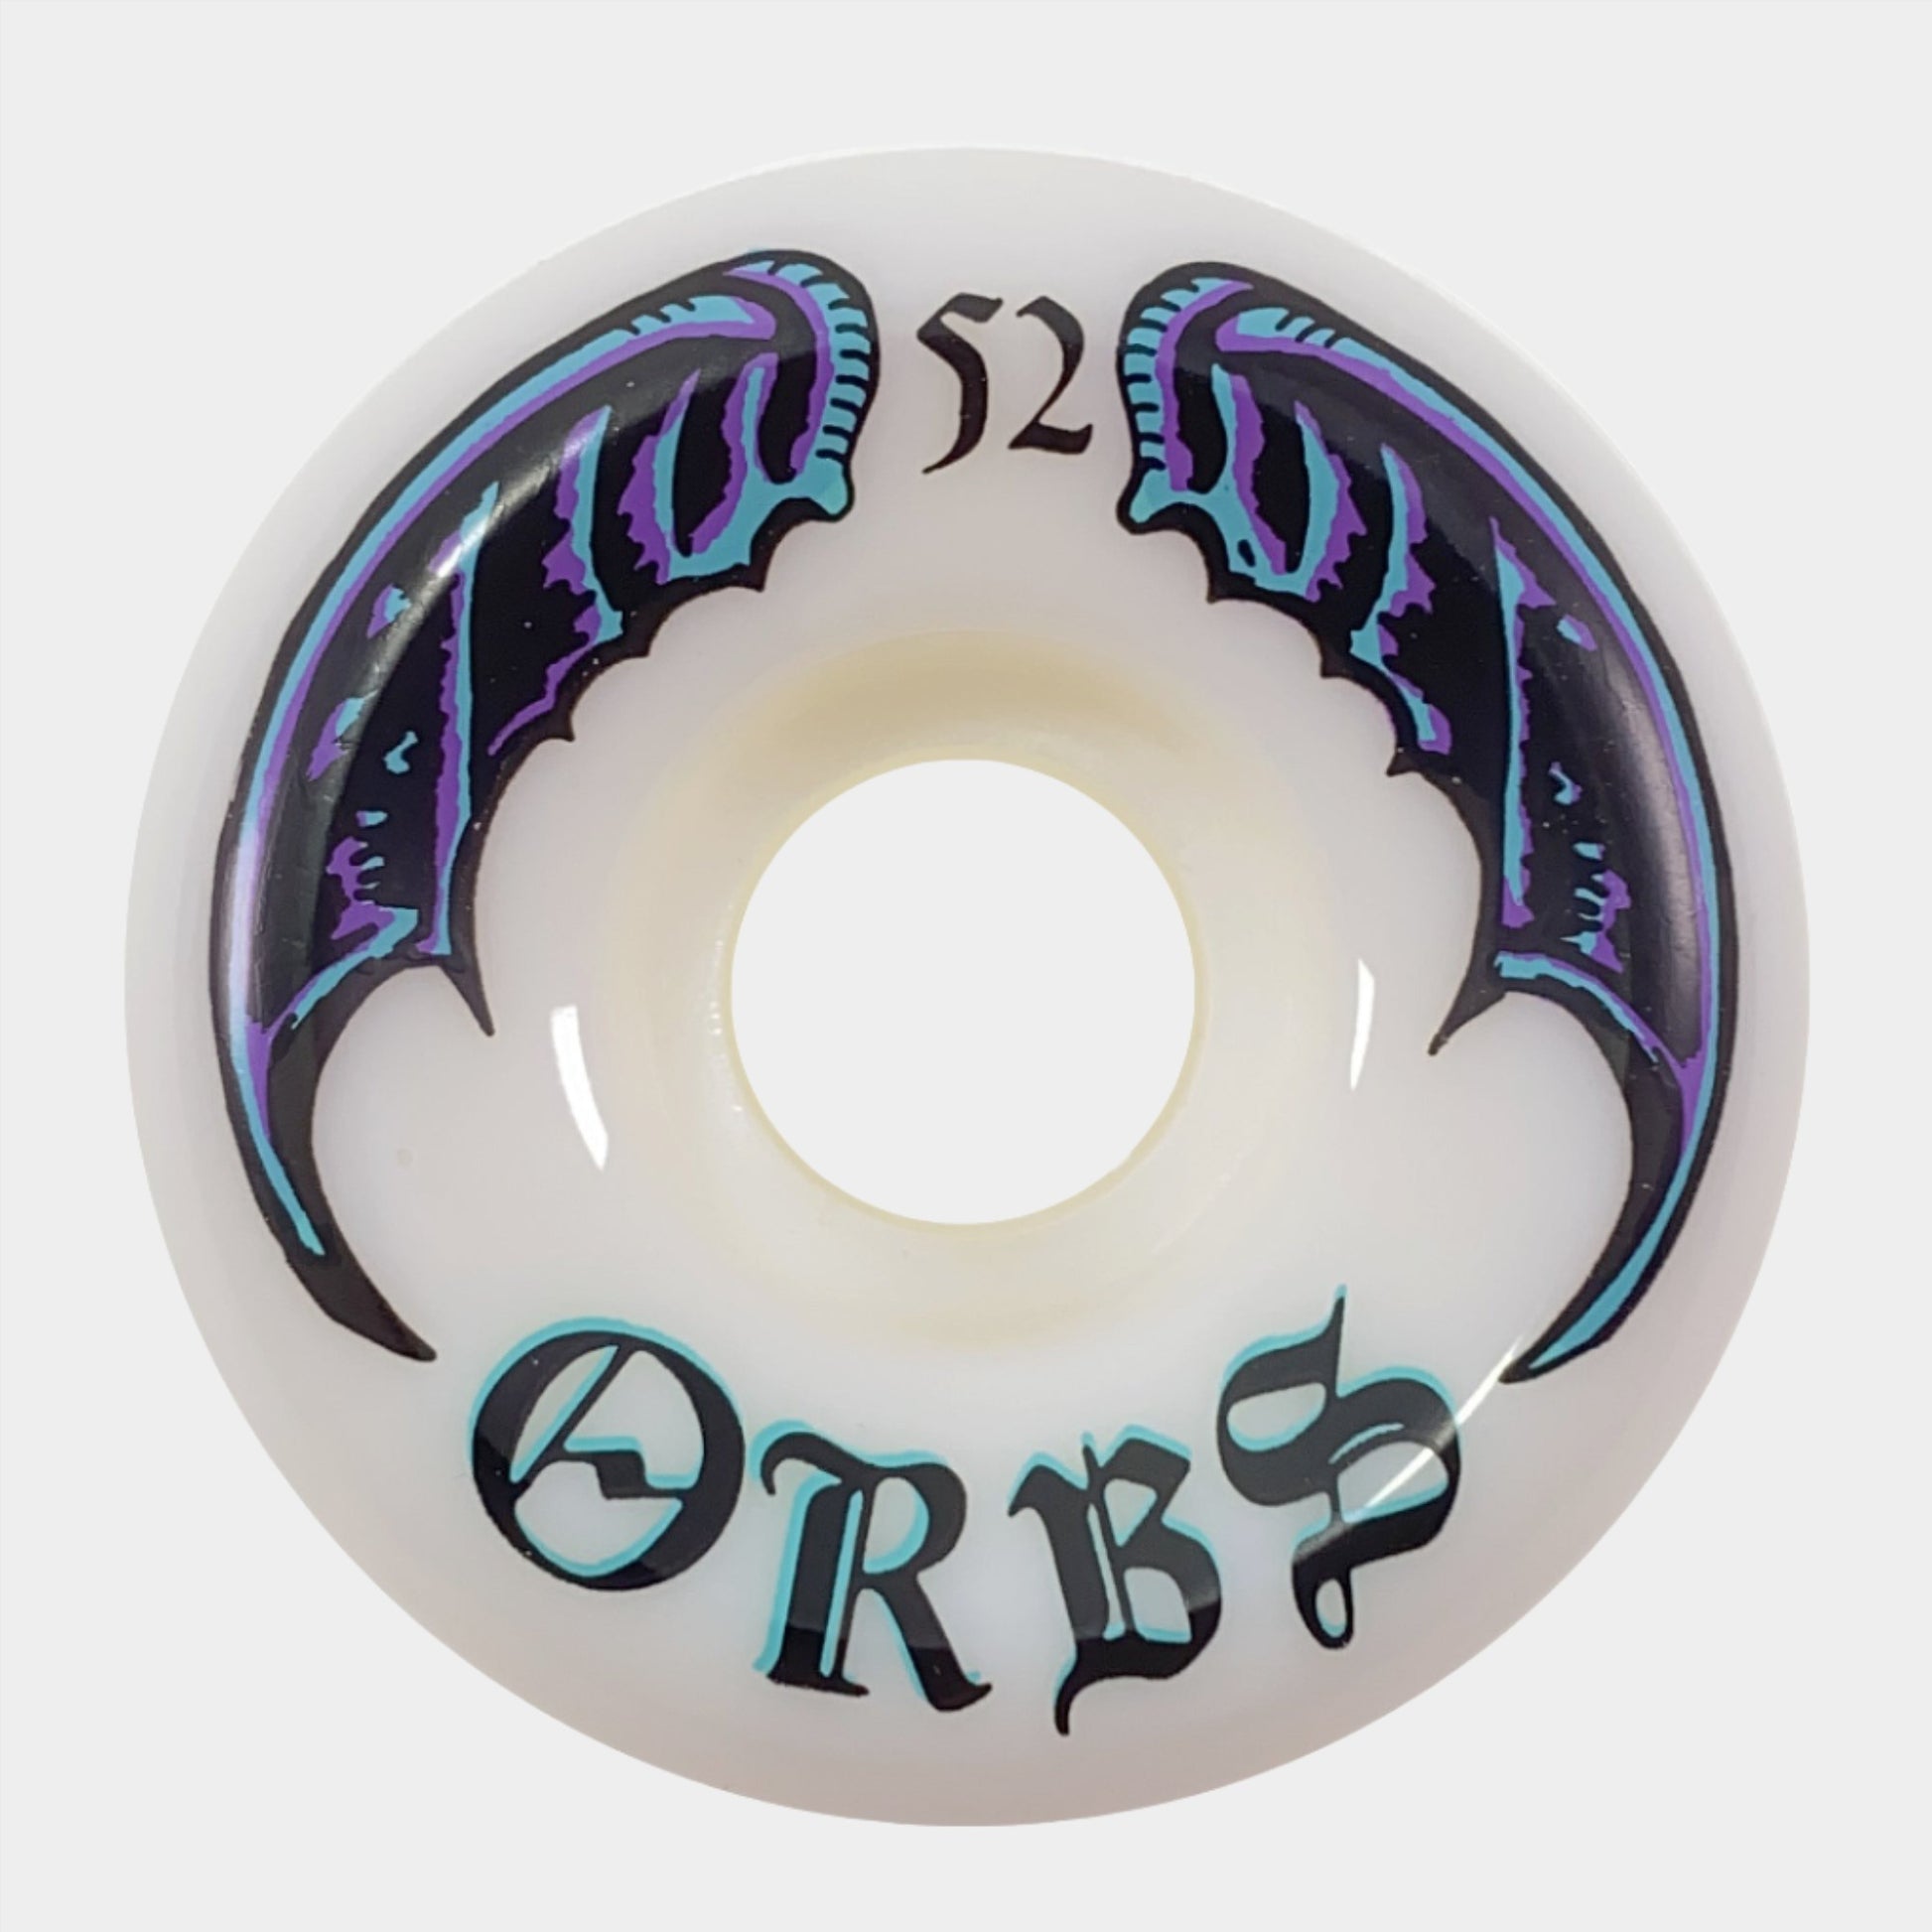 Orbs - 52mm - 99a - Specters - White - Prime Delux Store